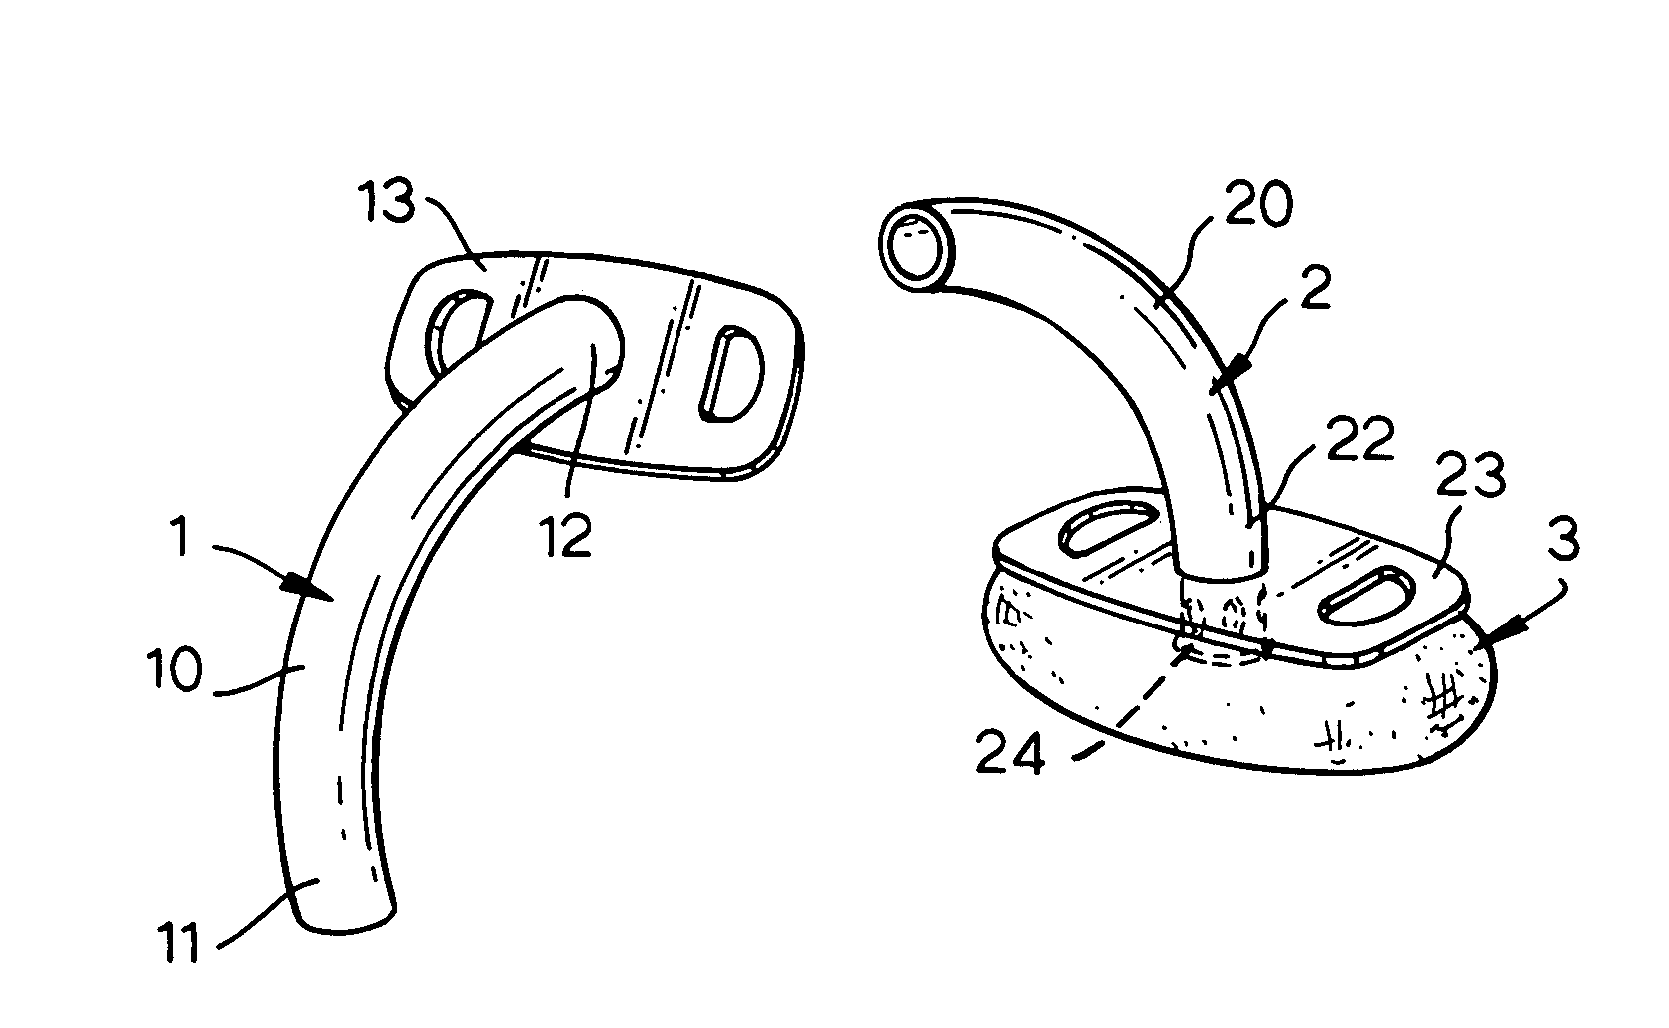 Gas-treatment devices